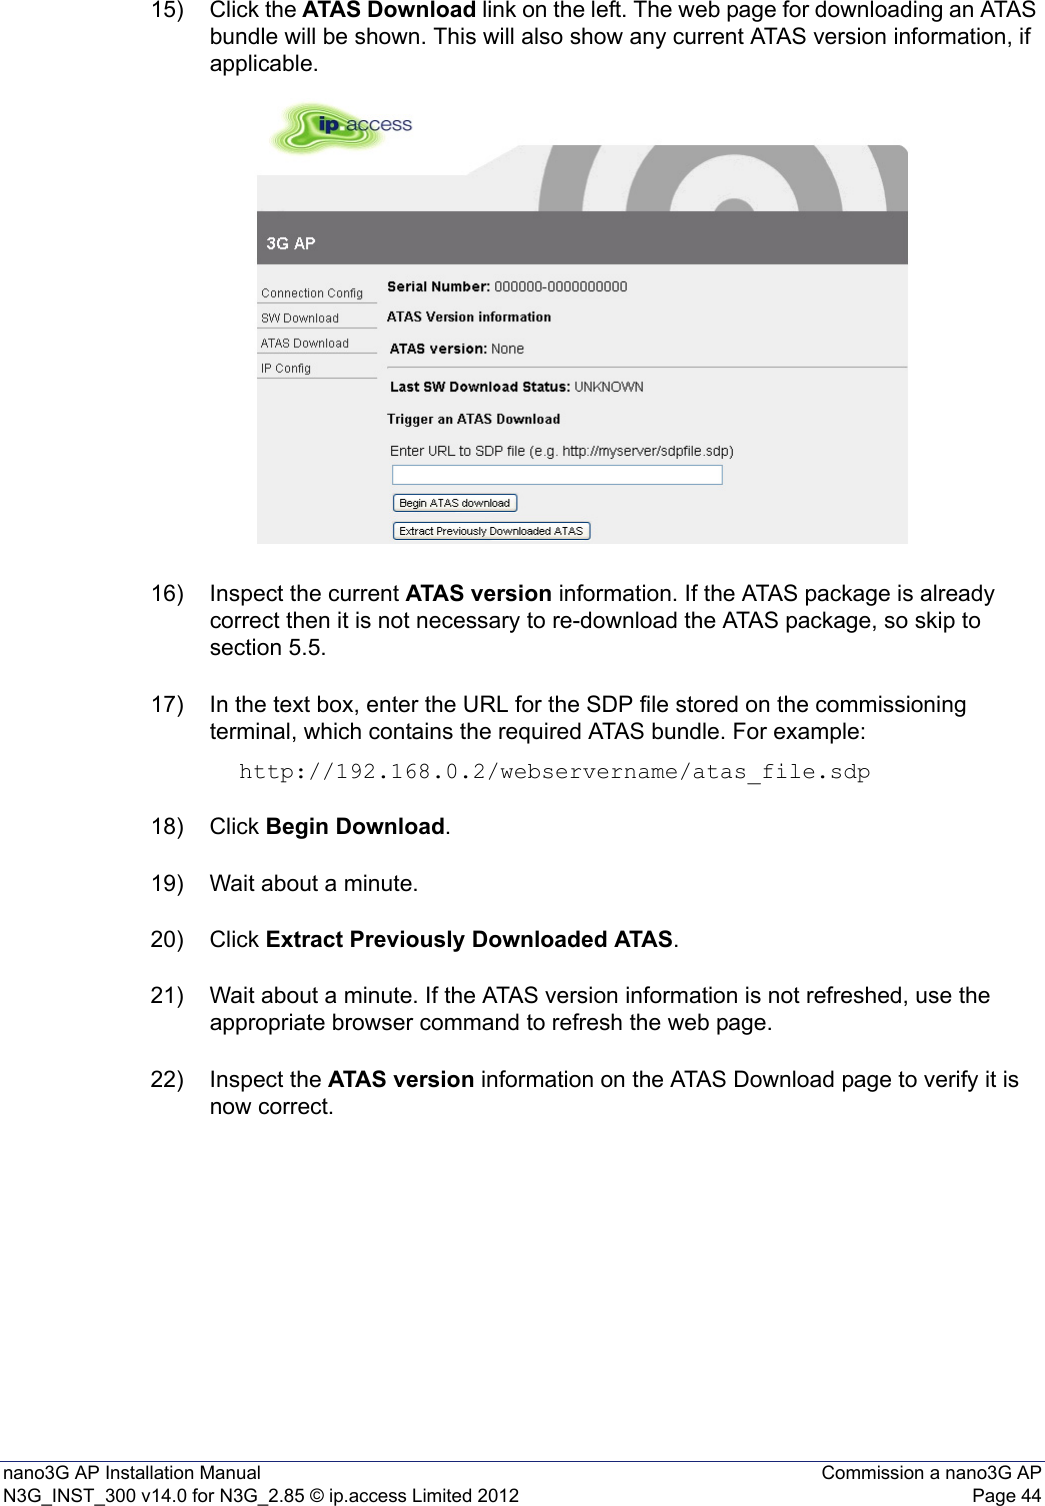 nano3G AP Installation Manual Commission a nano3G APN3G_INST_300 v14.0 for N3G_2.85 © ip.access Limited 2012 Page 4415) Click the ATAS Download link on the left. The web page for downloading an ATAS bundle will be shown. This will also show any current ATAS version information, if applicable.16) Inspect the current ATAS version information. If the ATAS package is already correct then it is not necessary to re-download the ATAS package, so skip to section 5.5. 17) In the text box, enter the URL for the SDP file stored on the commissioning terminal, which contains the required ATAS bundle. For example: http://192.168.0.2/webservername/atas_file.sdp18) Click Begin Download. 19) Wait about a minute.20) Click Extract Previously Downloaded ATAS. 21) Wait about a minute. If the ATAS version information is not refreshed, use the appropriate browser command to refresh the web page. 22) Inspect the ATAS version information on the ATAS Download page to verify it is now correct.